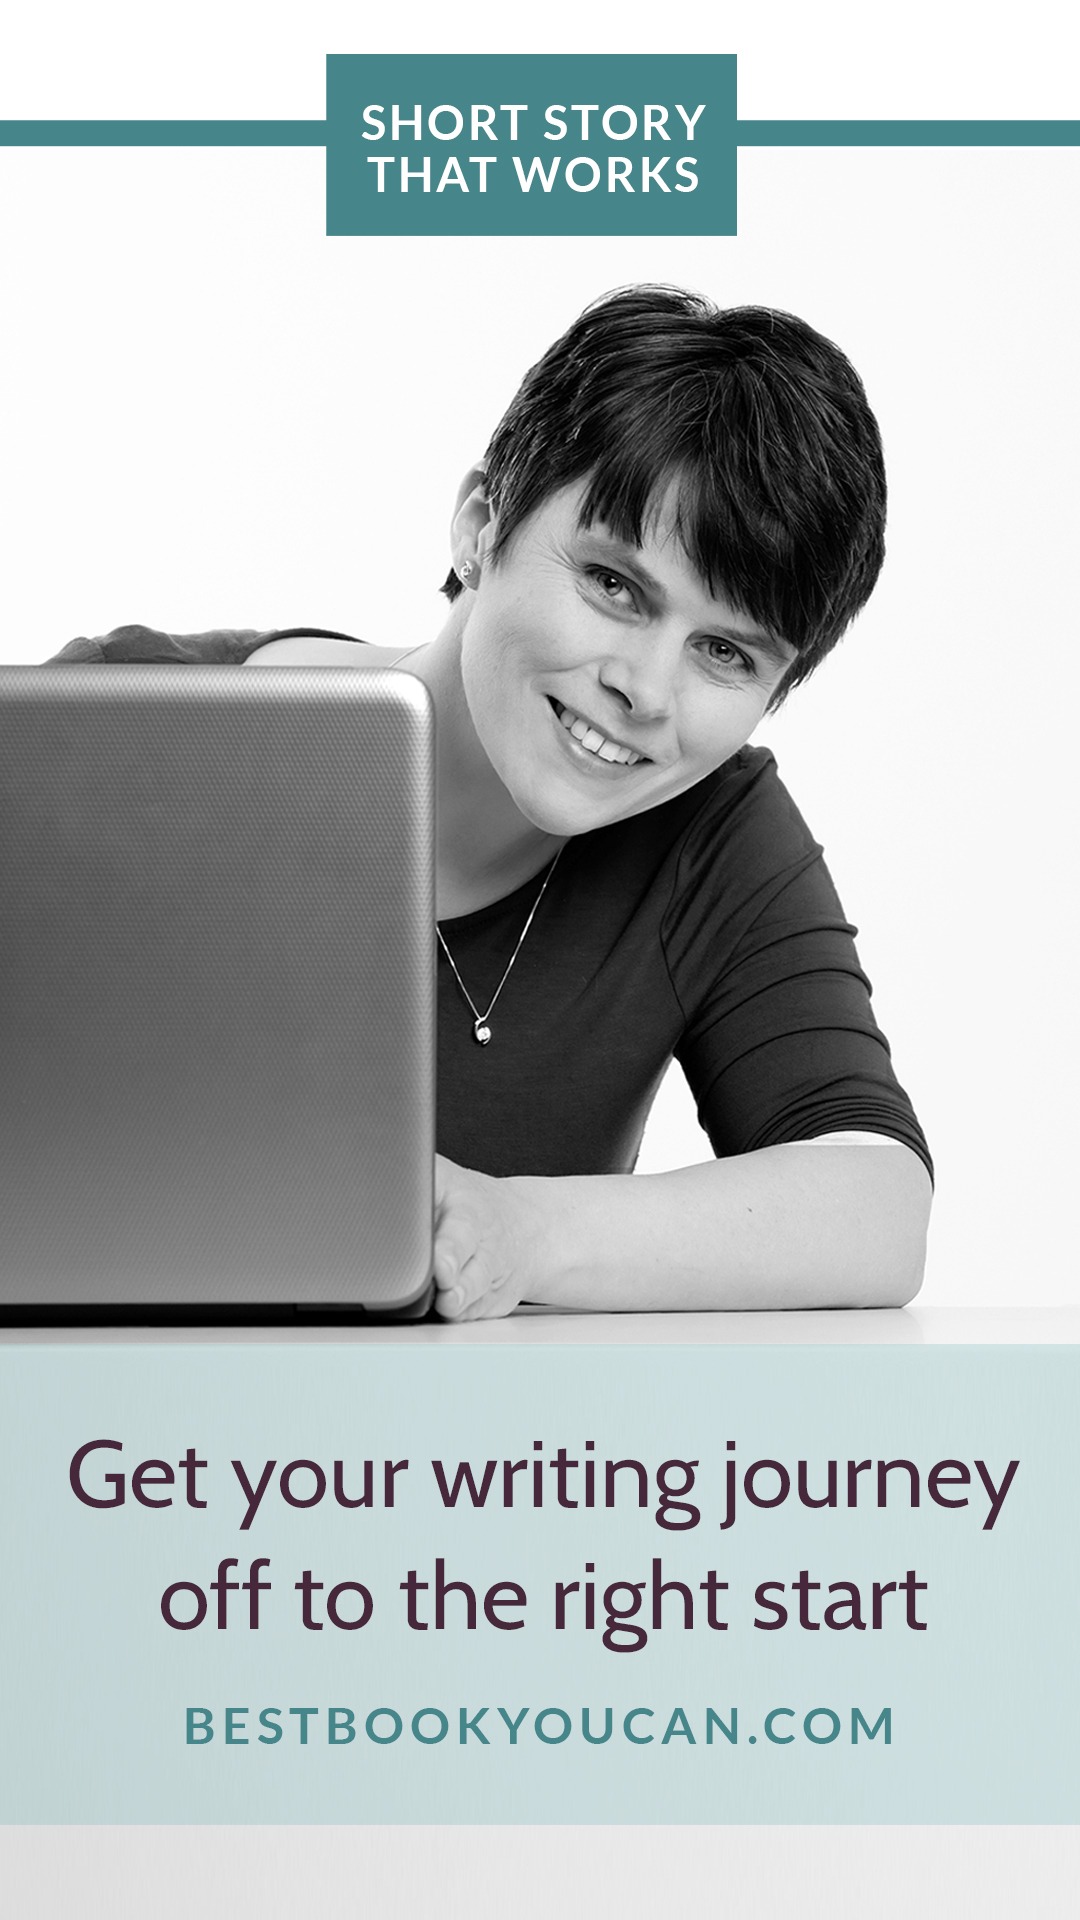 Short Stories that work - online course by Deanne Adams, Story Coach and mentor